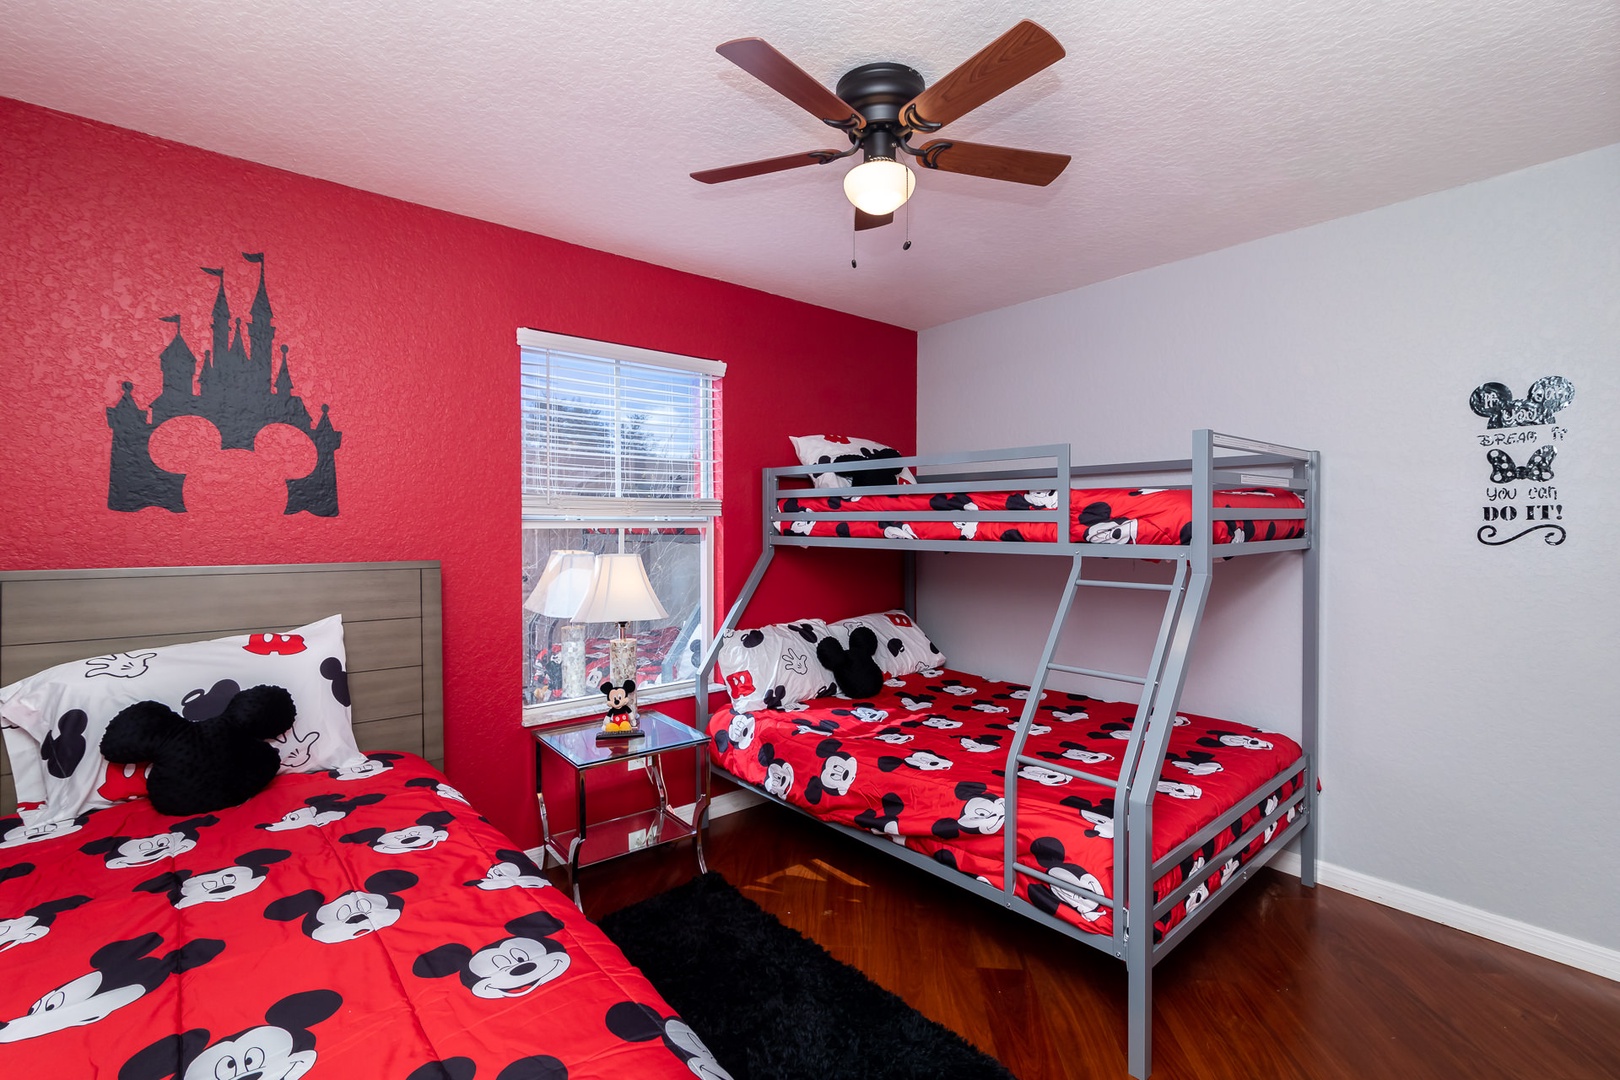 Kids will love the Mickey themed rooms!